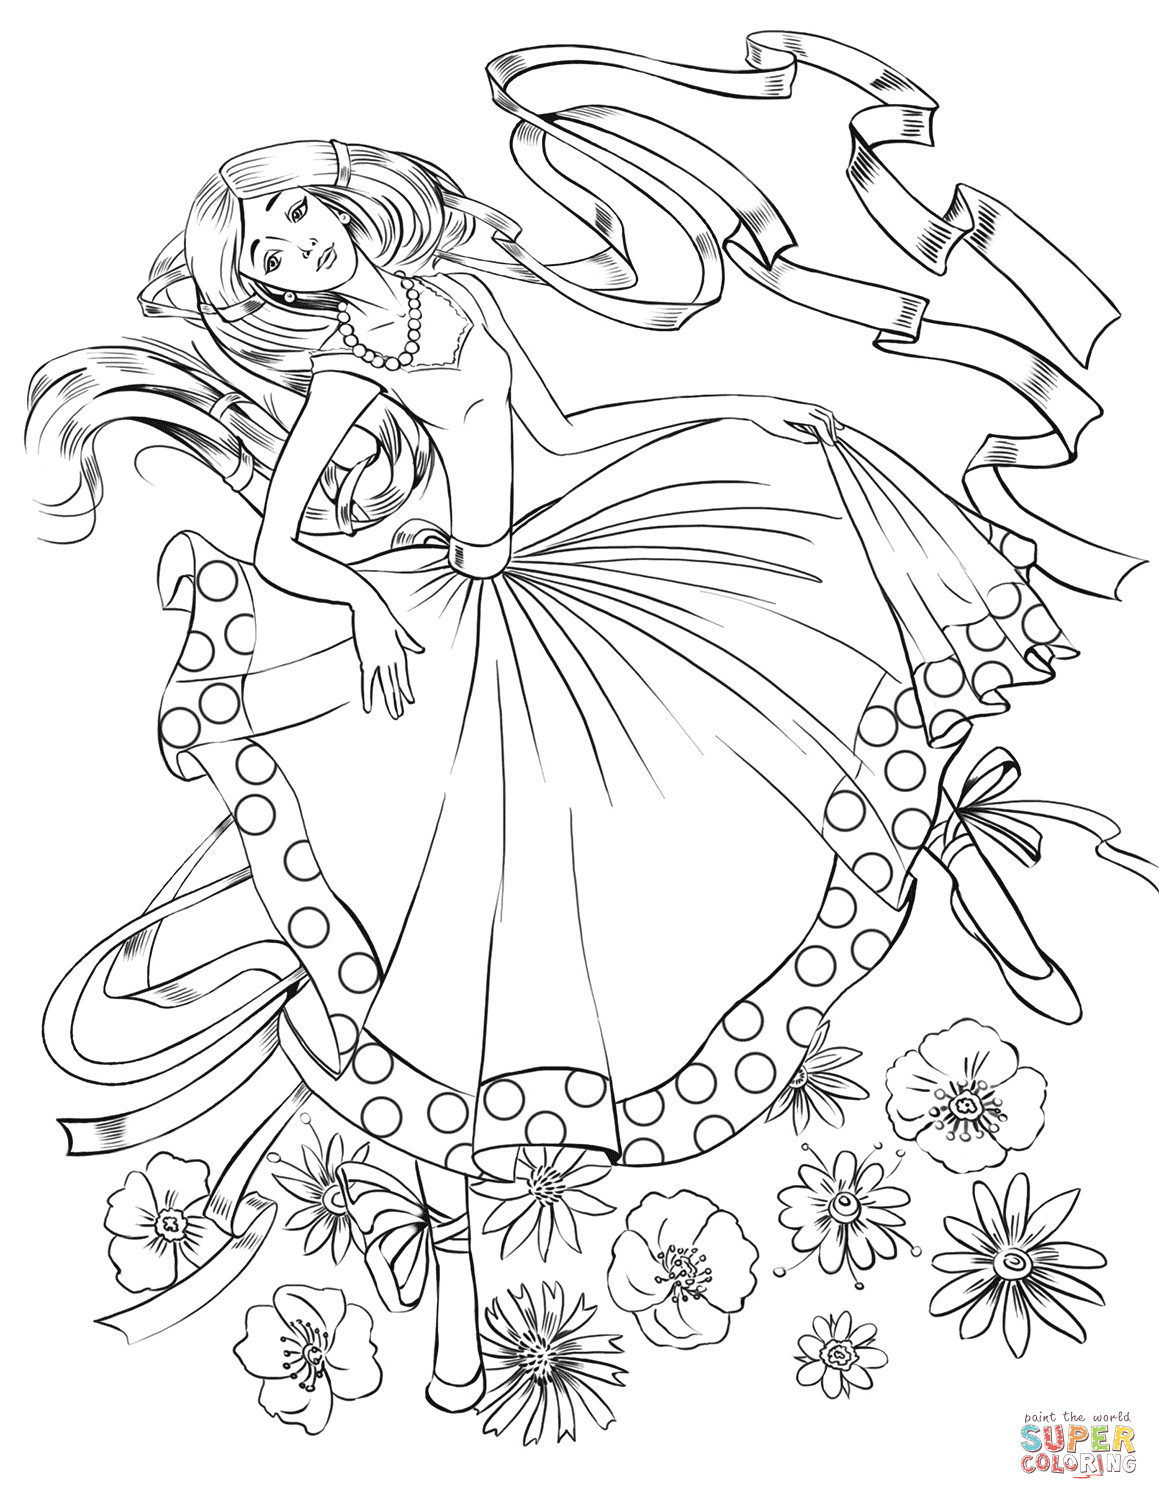 Girls Dancing Coloring Pages
 Girl Dancing with a Ribbon coloring page